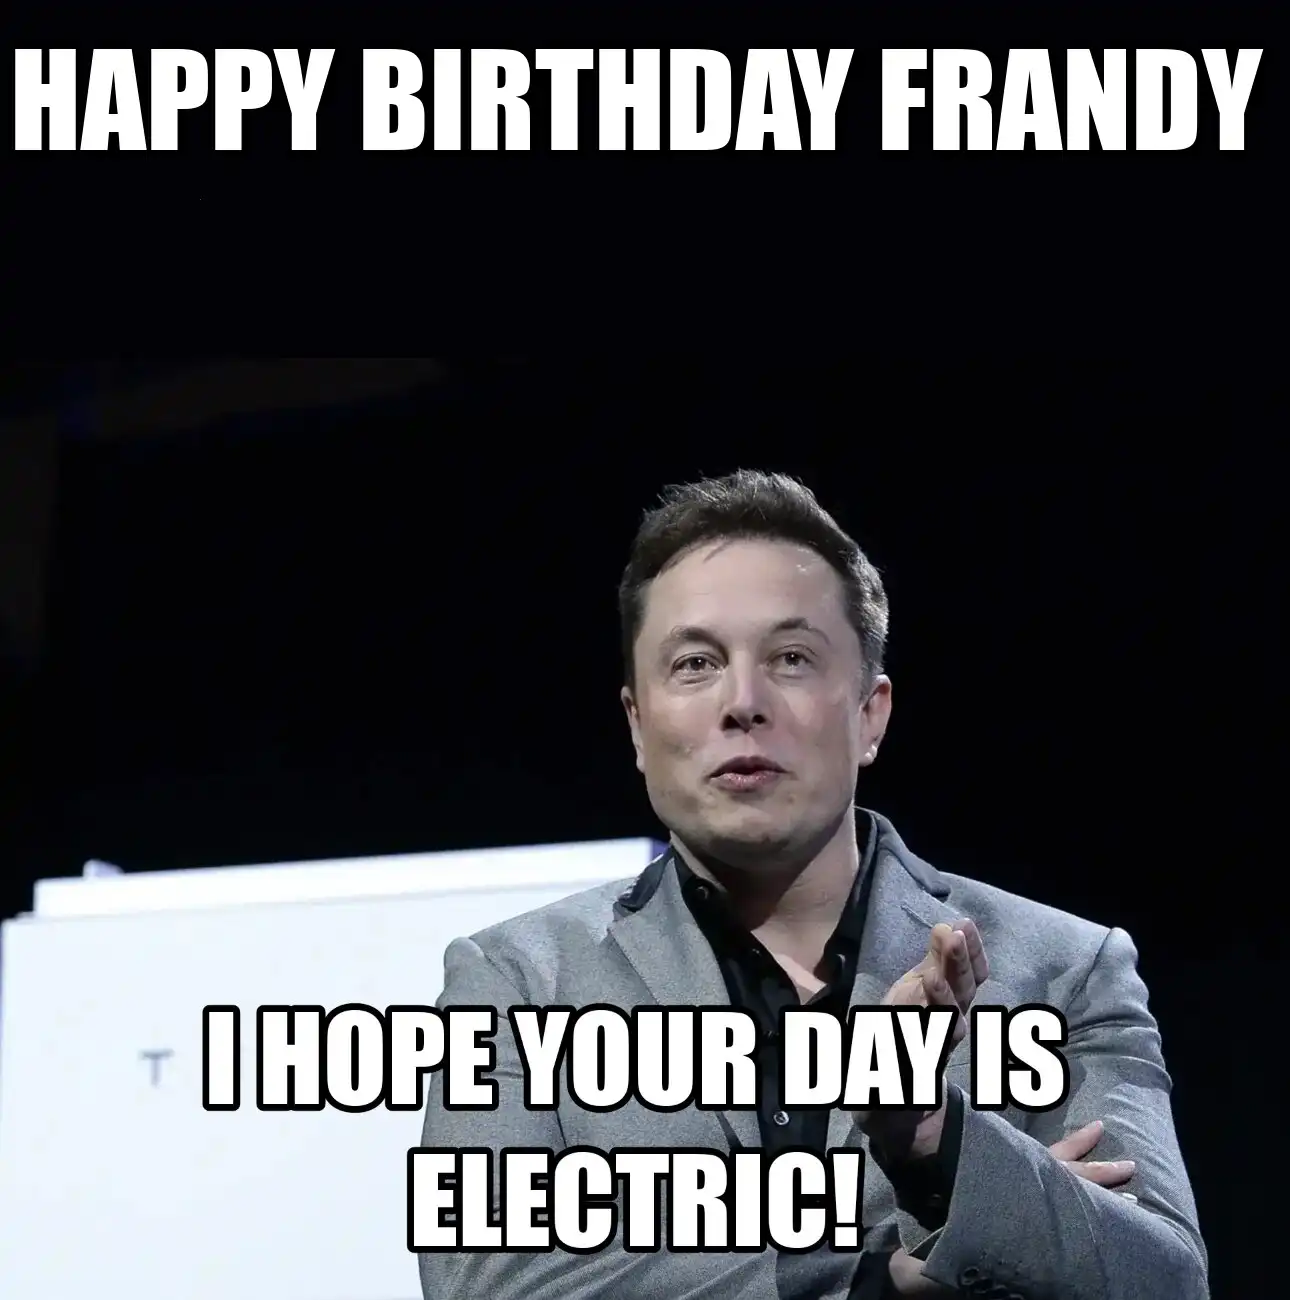 Happy Birthday Frandy I Hope Your Day Is Electric Meme